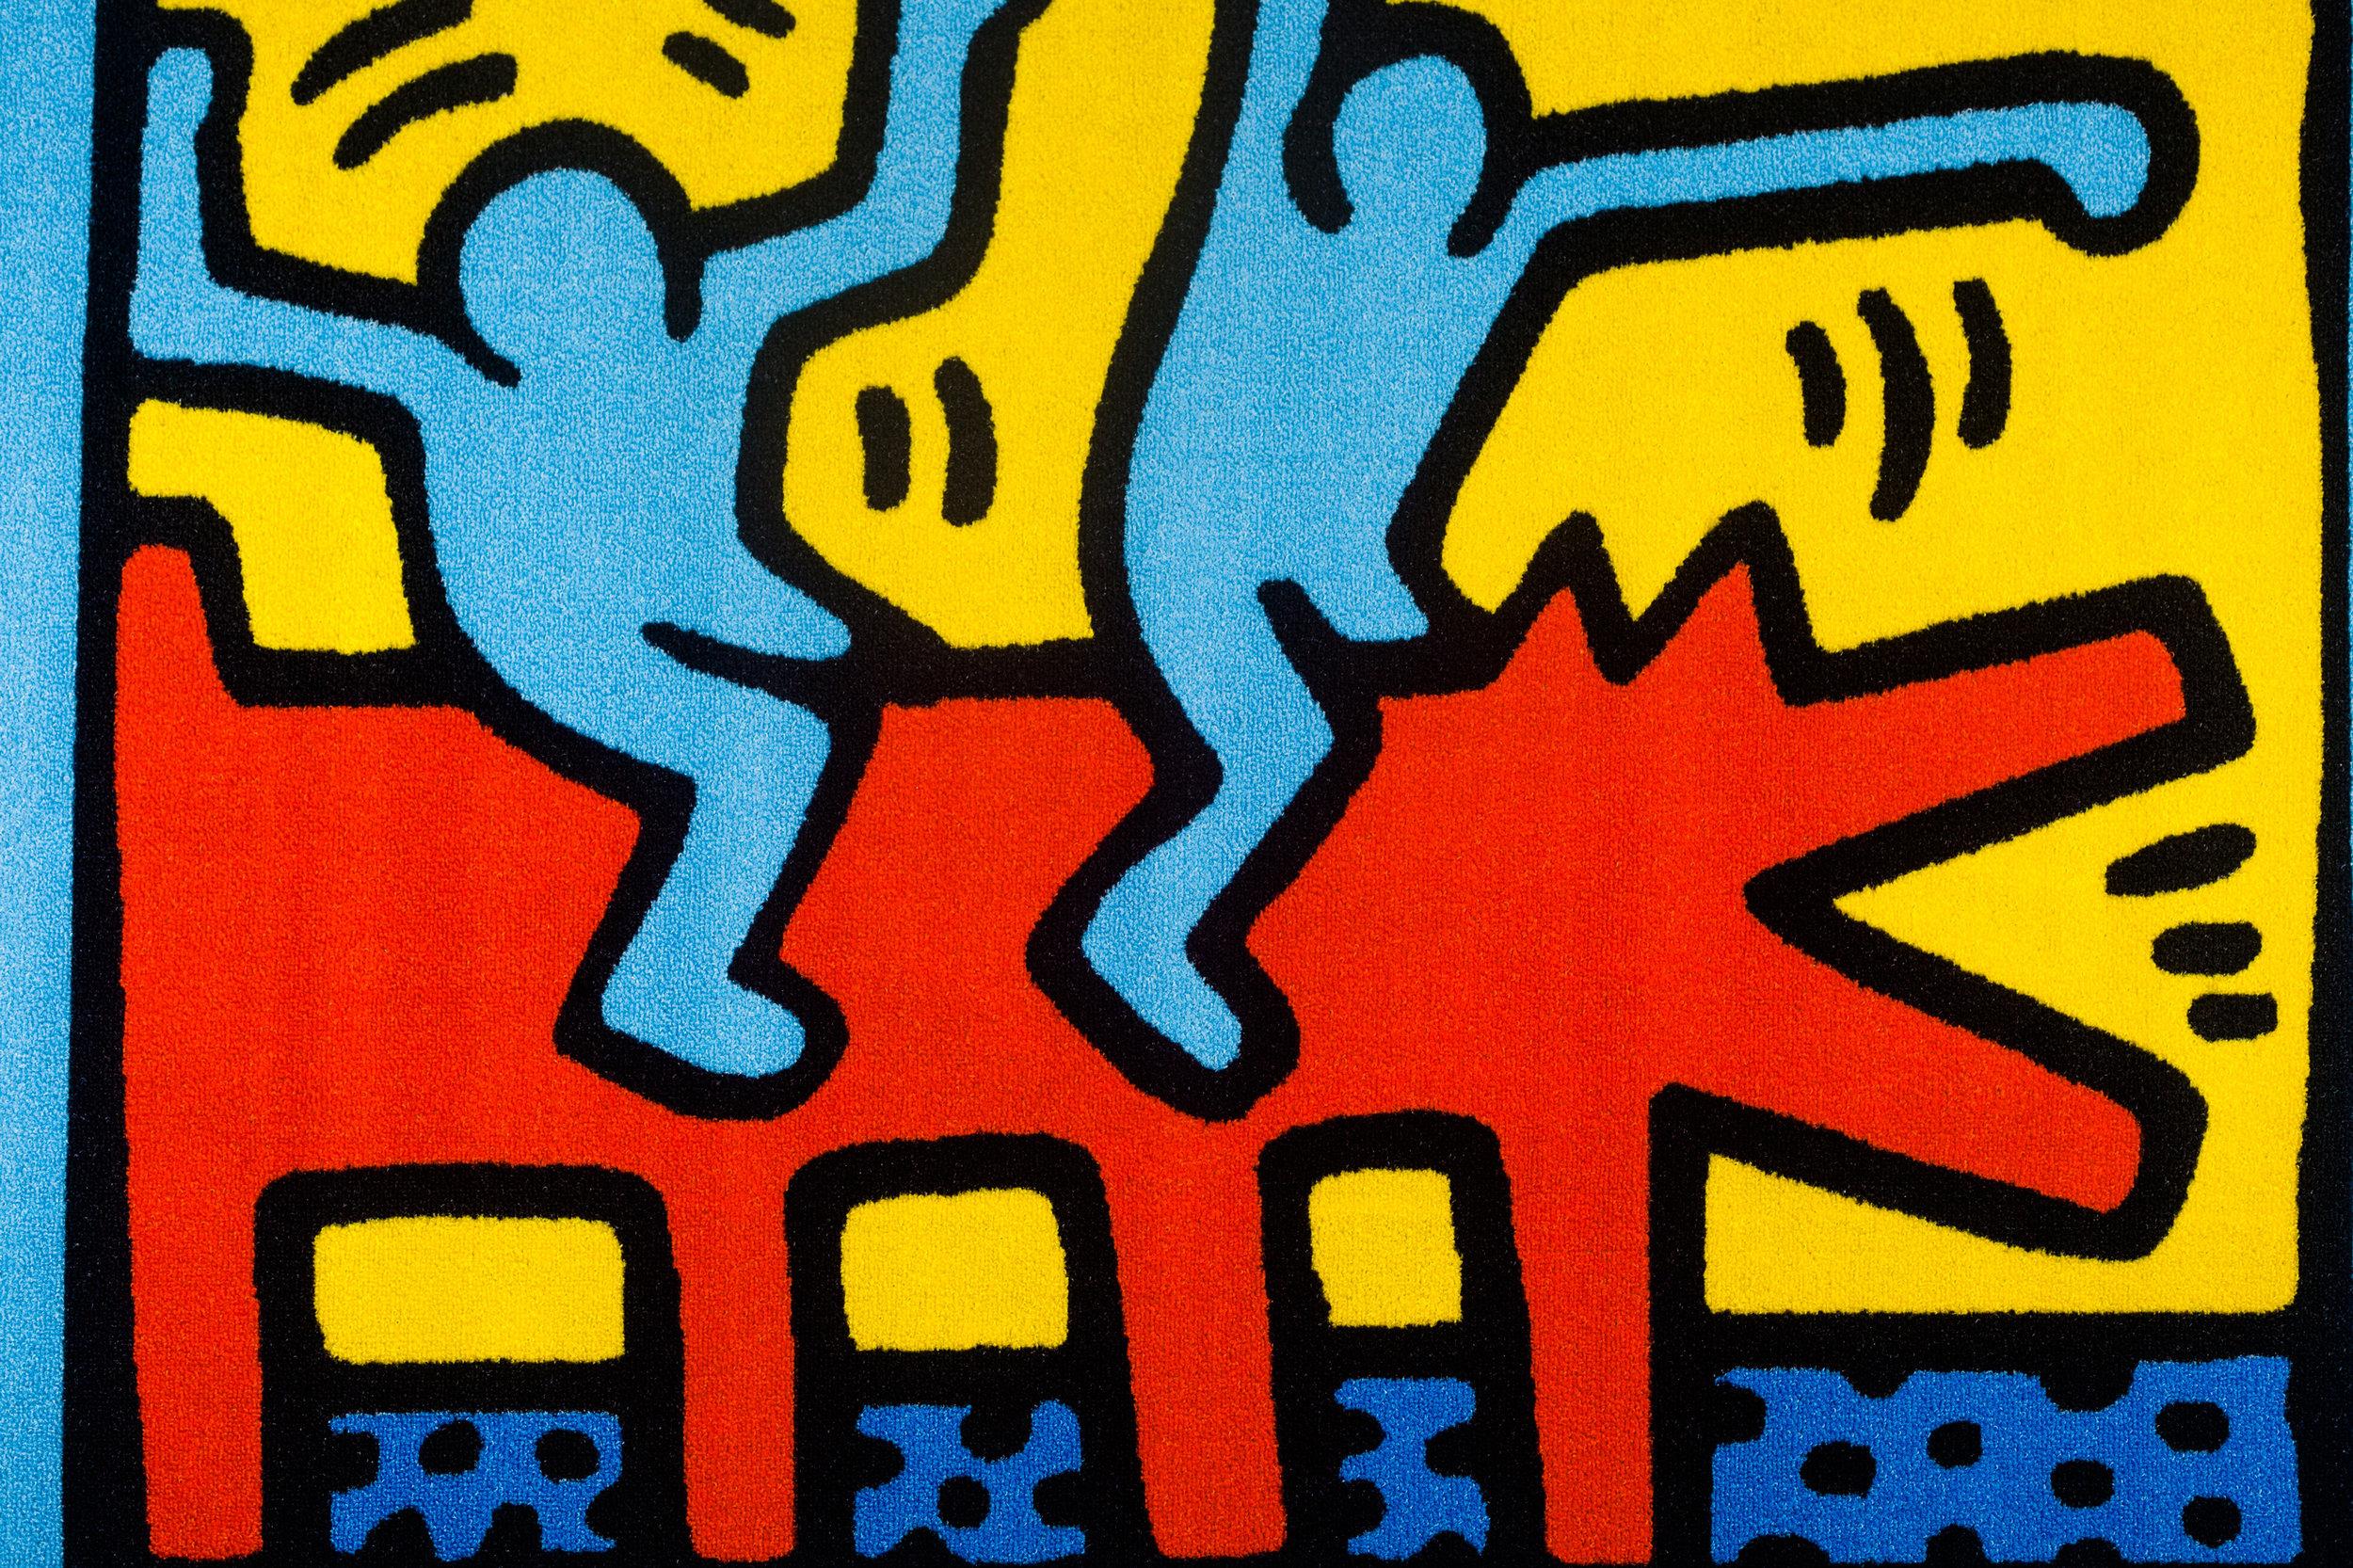 Keith Haring rug with two dancing figures on a dog, distributed by Comart Italia. Copyright Keith Haring Foundation, licensed by Artestar, New York. New old stock, in packaging. For anyone who admires the work of Keith Haring.

Year: